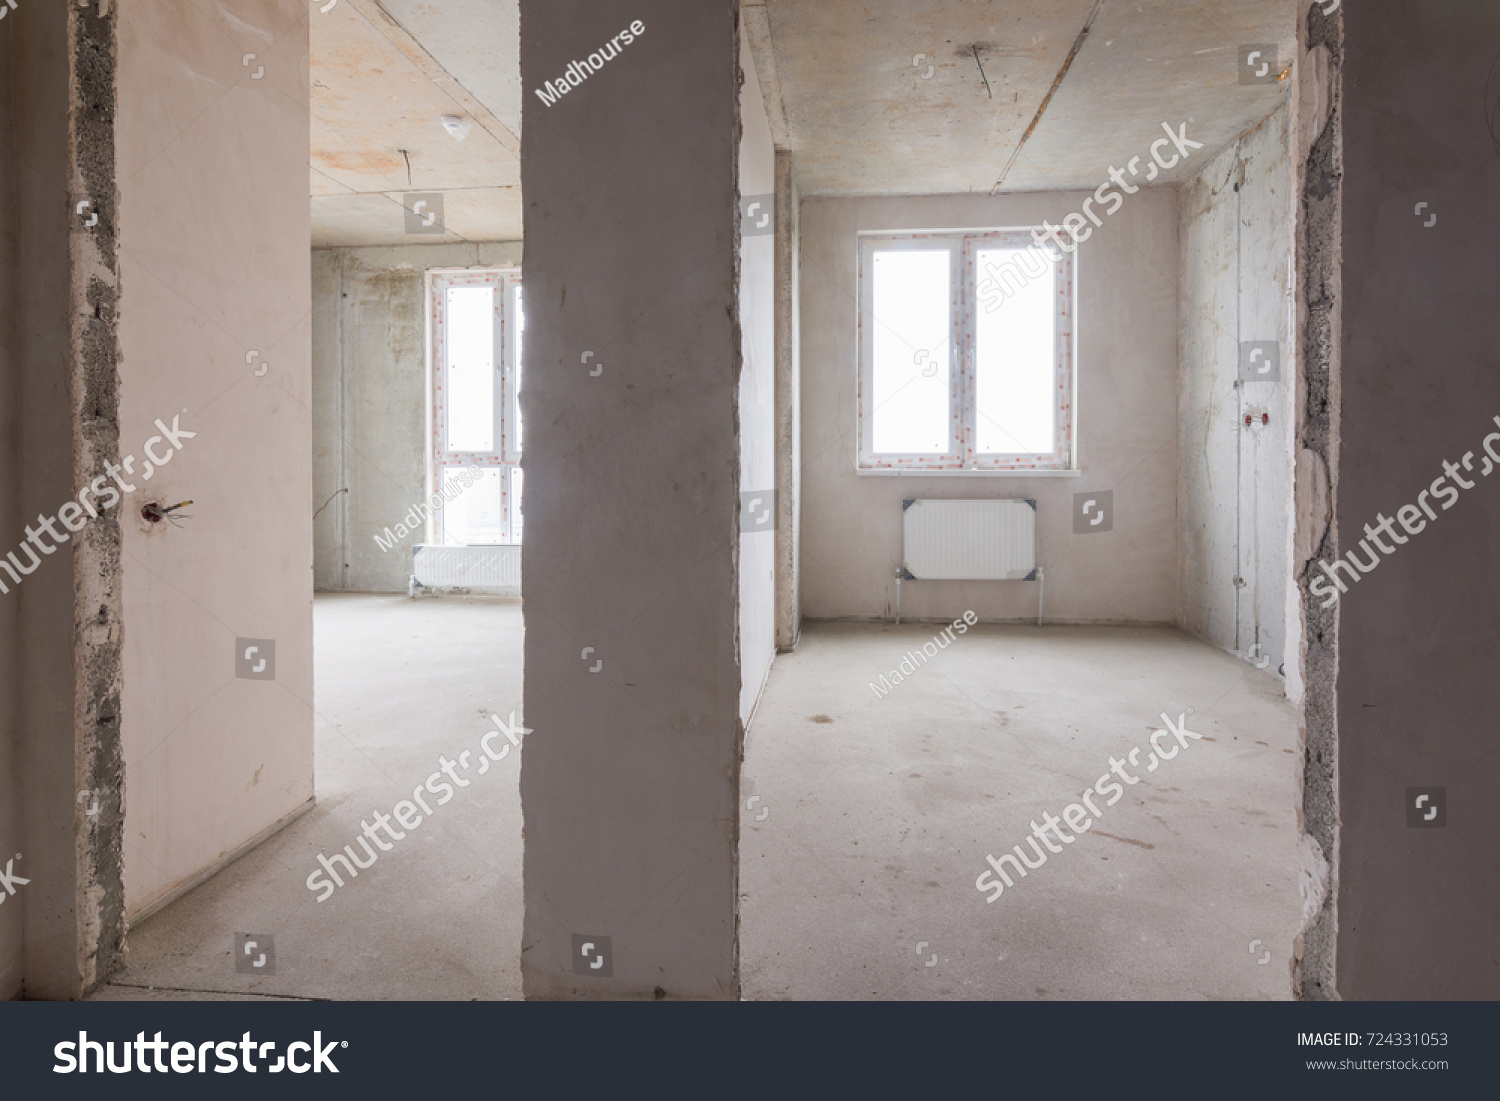 The layout of rooms and rooms in a new building, a view of two rooms and a partition between them #724331053